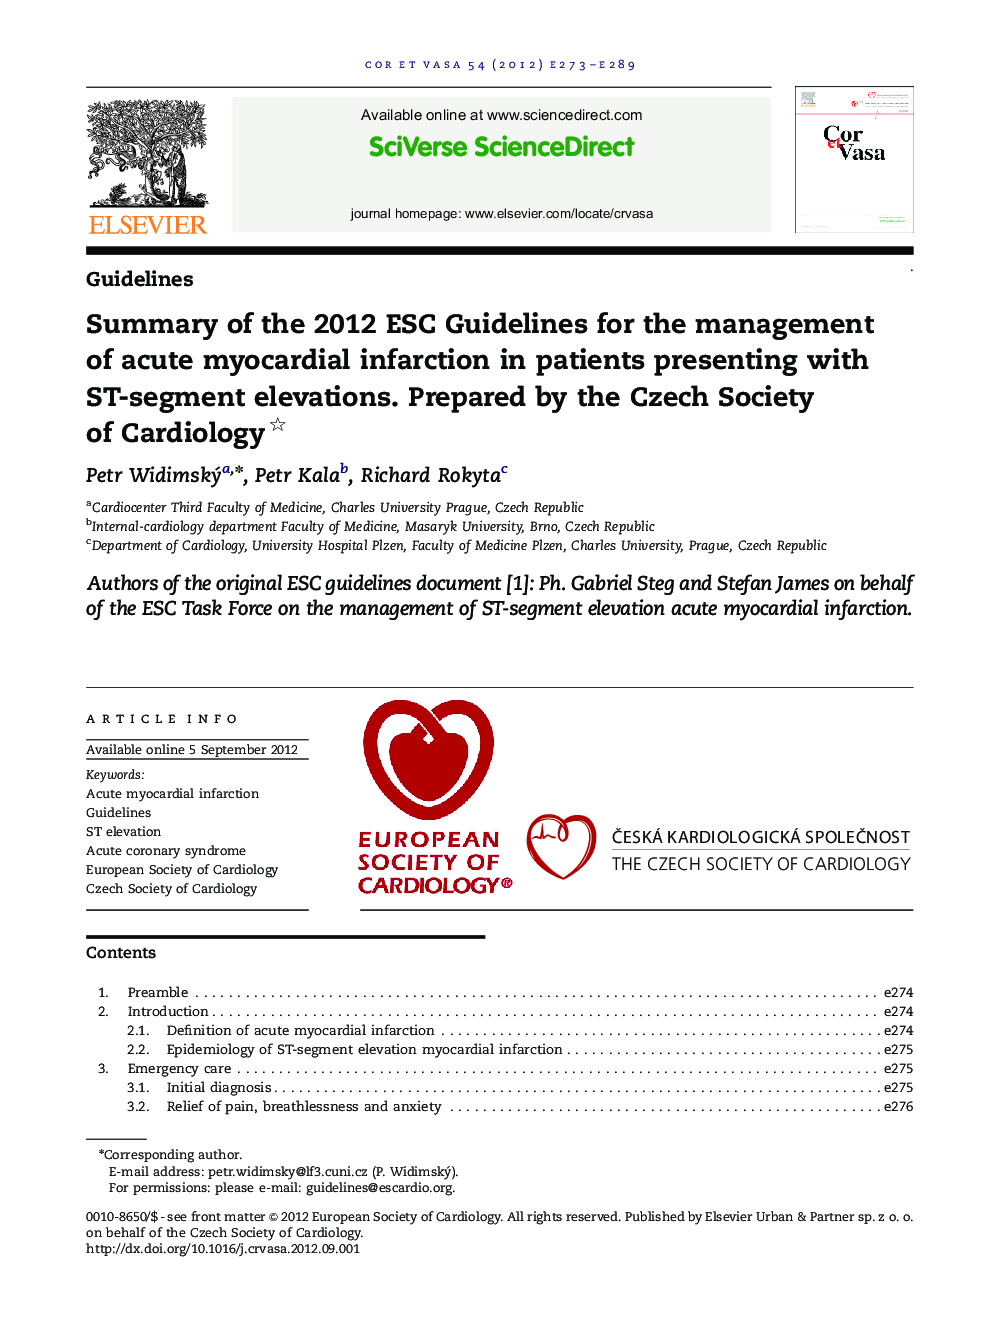 Summary of the 2012 ESC Guidelines for the management of acute myocardial infarction in patients presenting with ST-segment elevations. Prepared by the Czech Society of Cardiology*